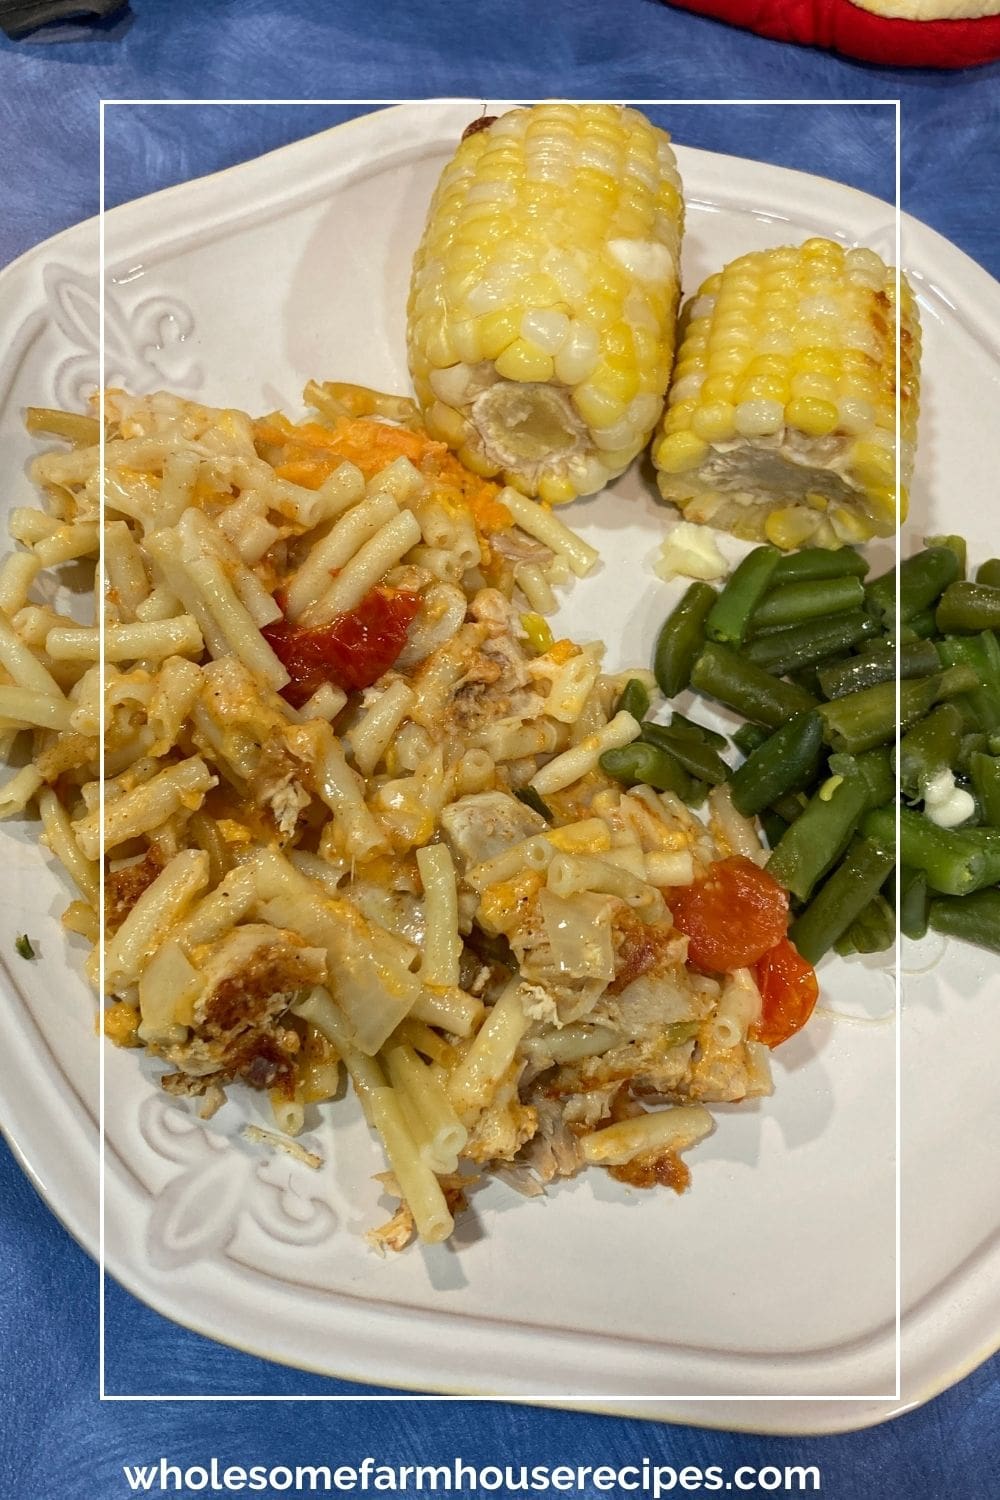 Easy Dinner Recipe with Chicken Bake green beans and corn